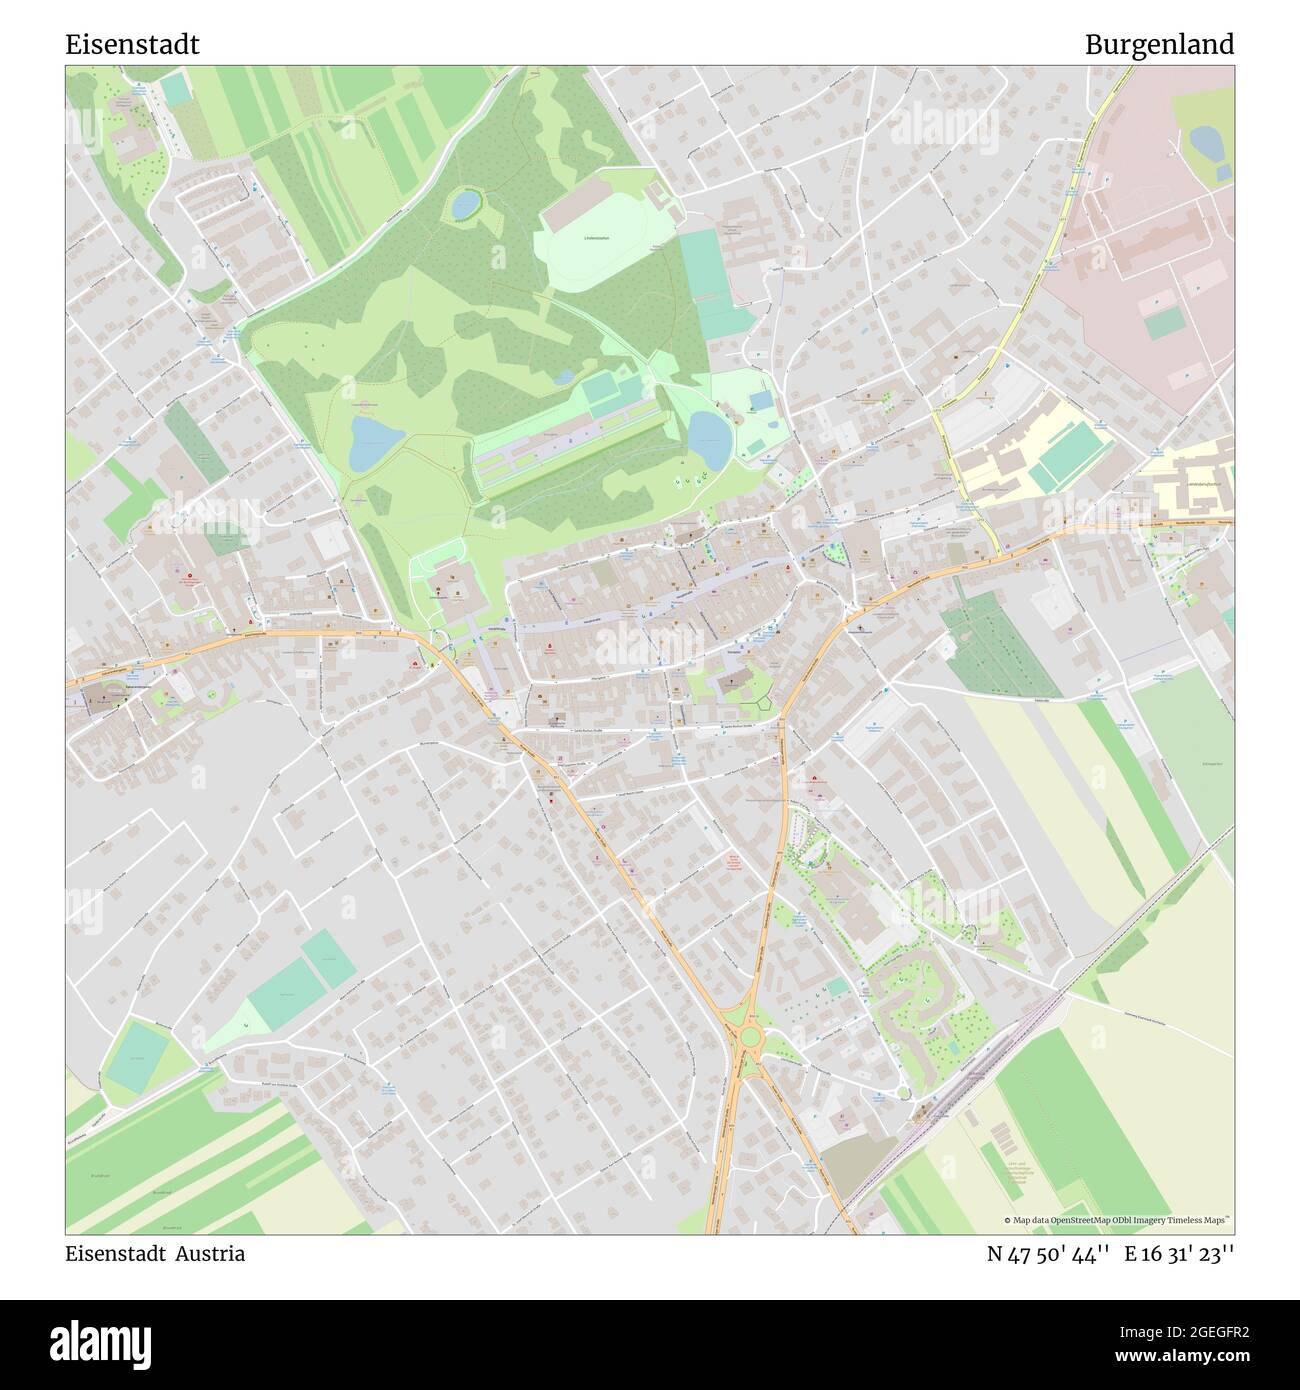 Eisenstadt, Eisenstadt, Austria, Burgenland, N 47 50' 44'', E 16 31' 23'',  map, Timeless Map published in 2021. Travelers, explorers and adventurers  like Florence Nightingale, David Livingstone, Ernest Shackleton, Lewis and  Clark